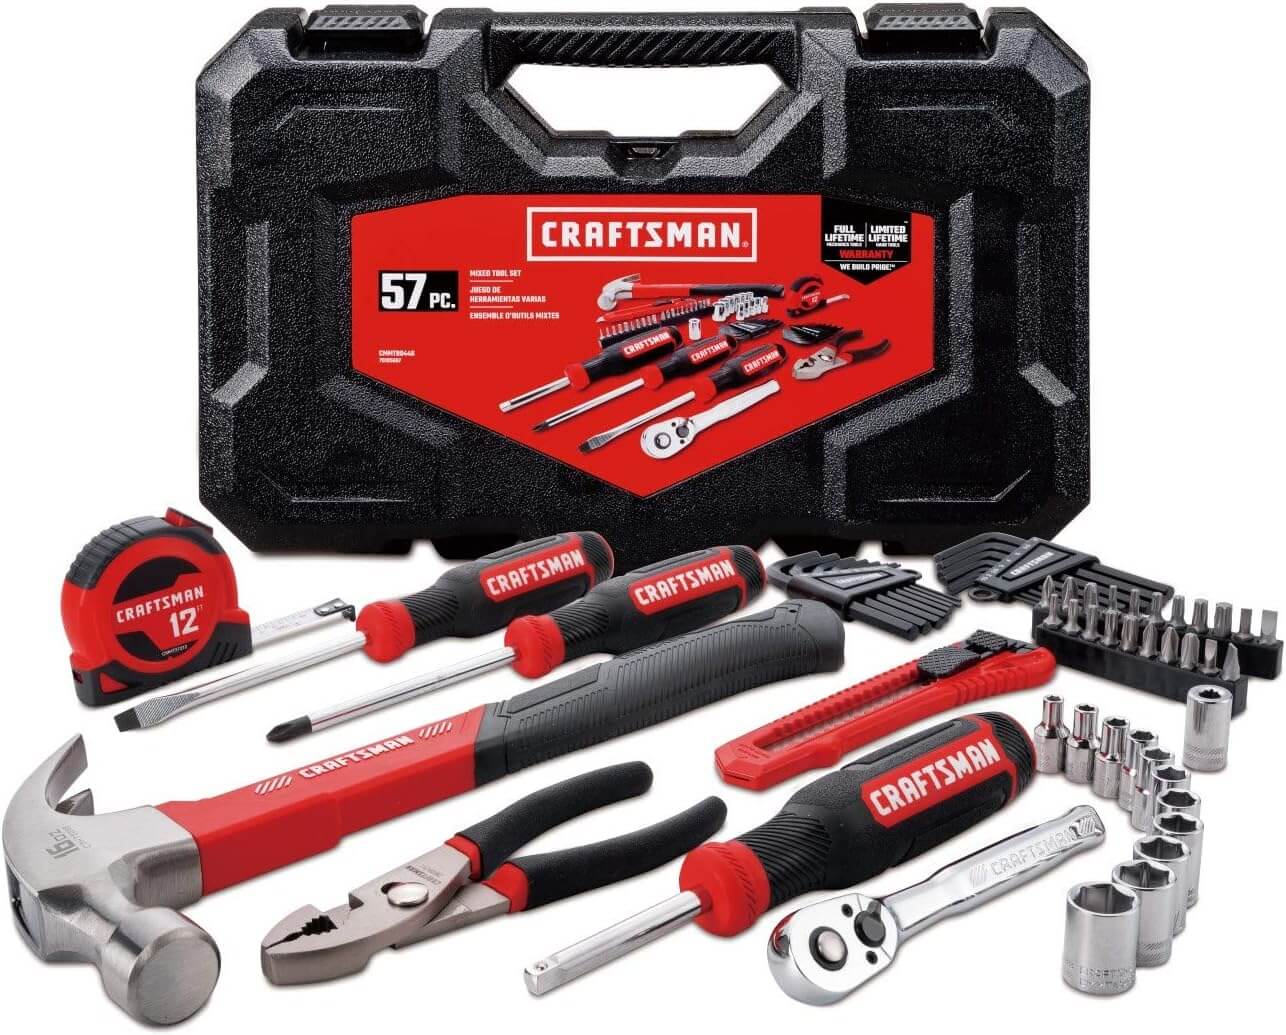 Screwdrivers, Drill Bits, Sockets, Ratchet, Hex Keys, Tape Measure, Pliers and More (CMMT99446)